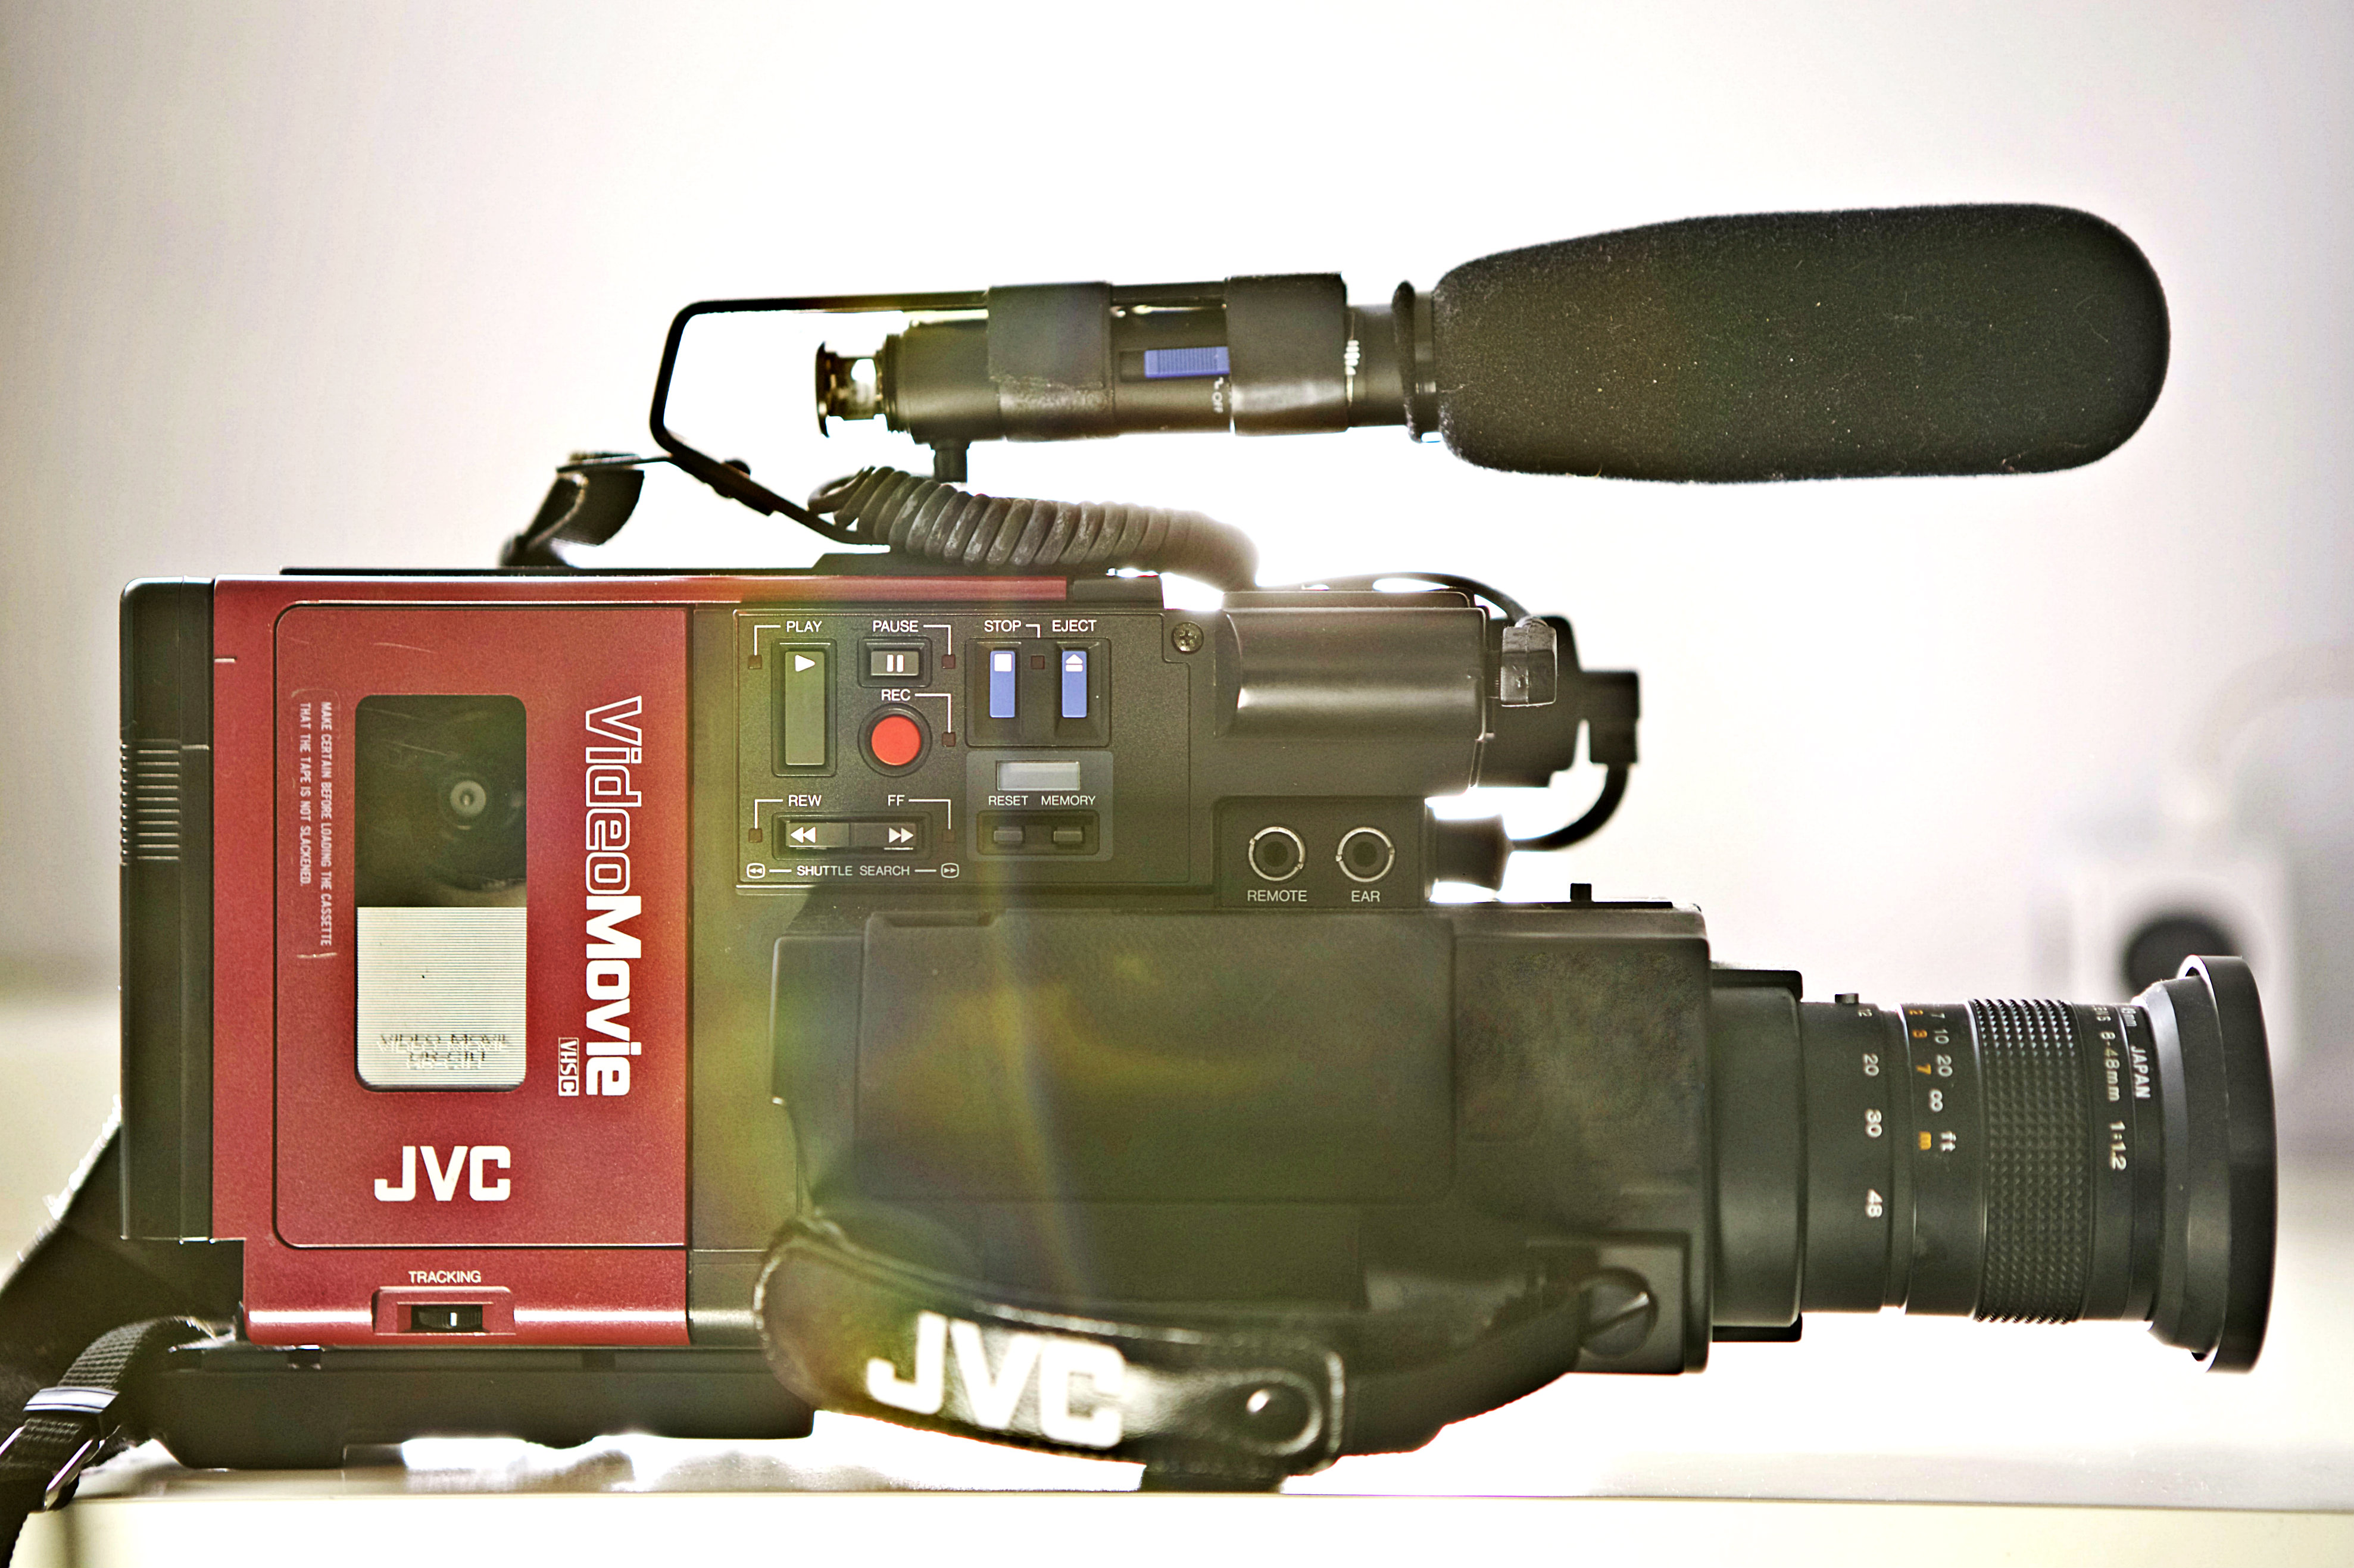 Dan Rascal - An Ottawa Video Production Company |The JVC GR-C1 in Back To The Future